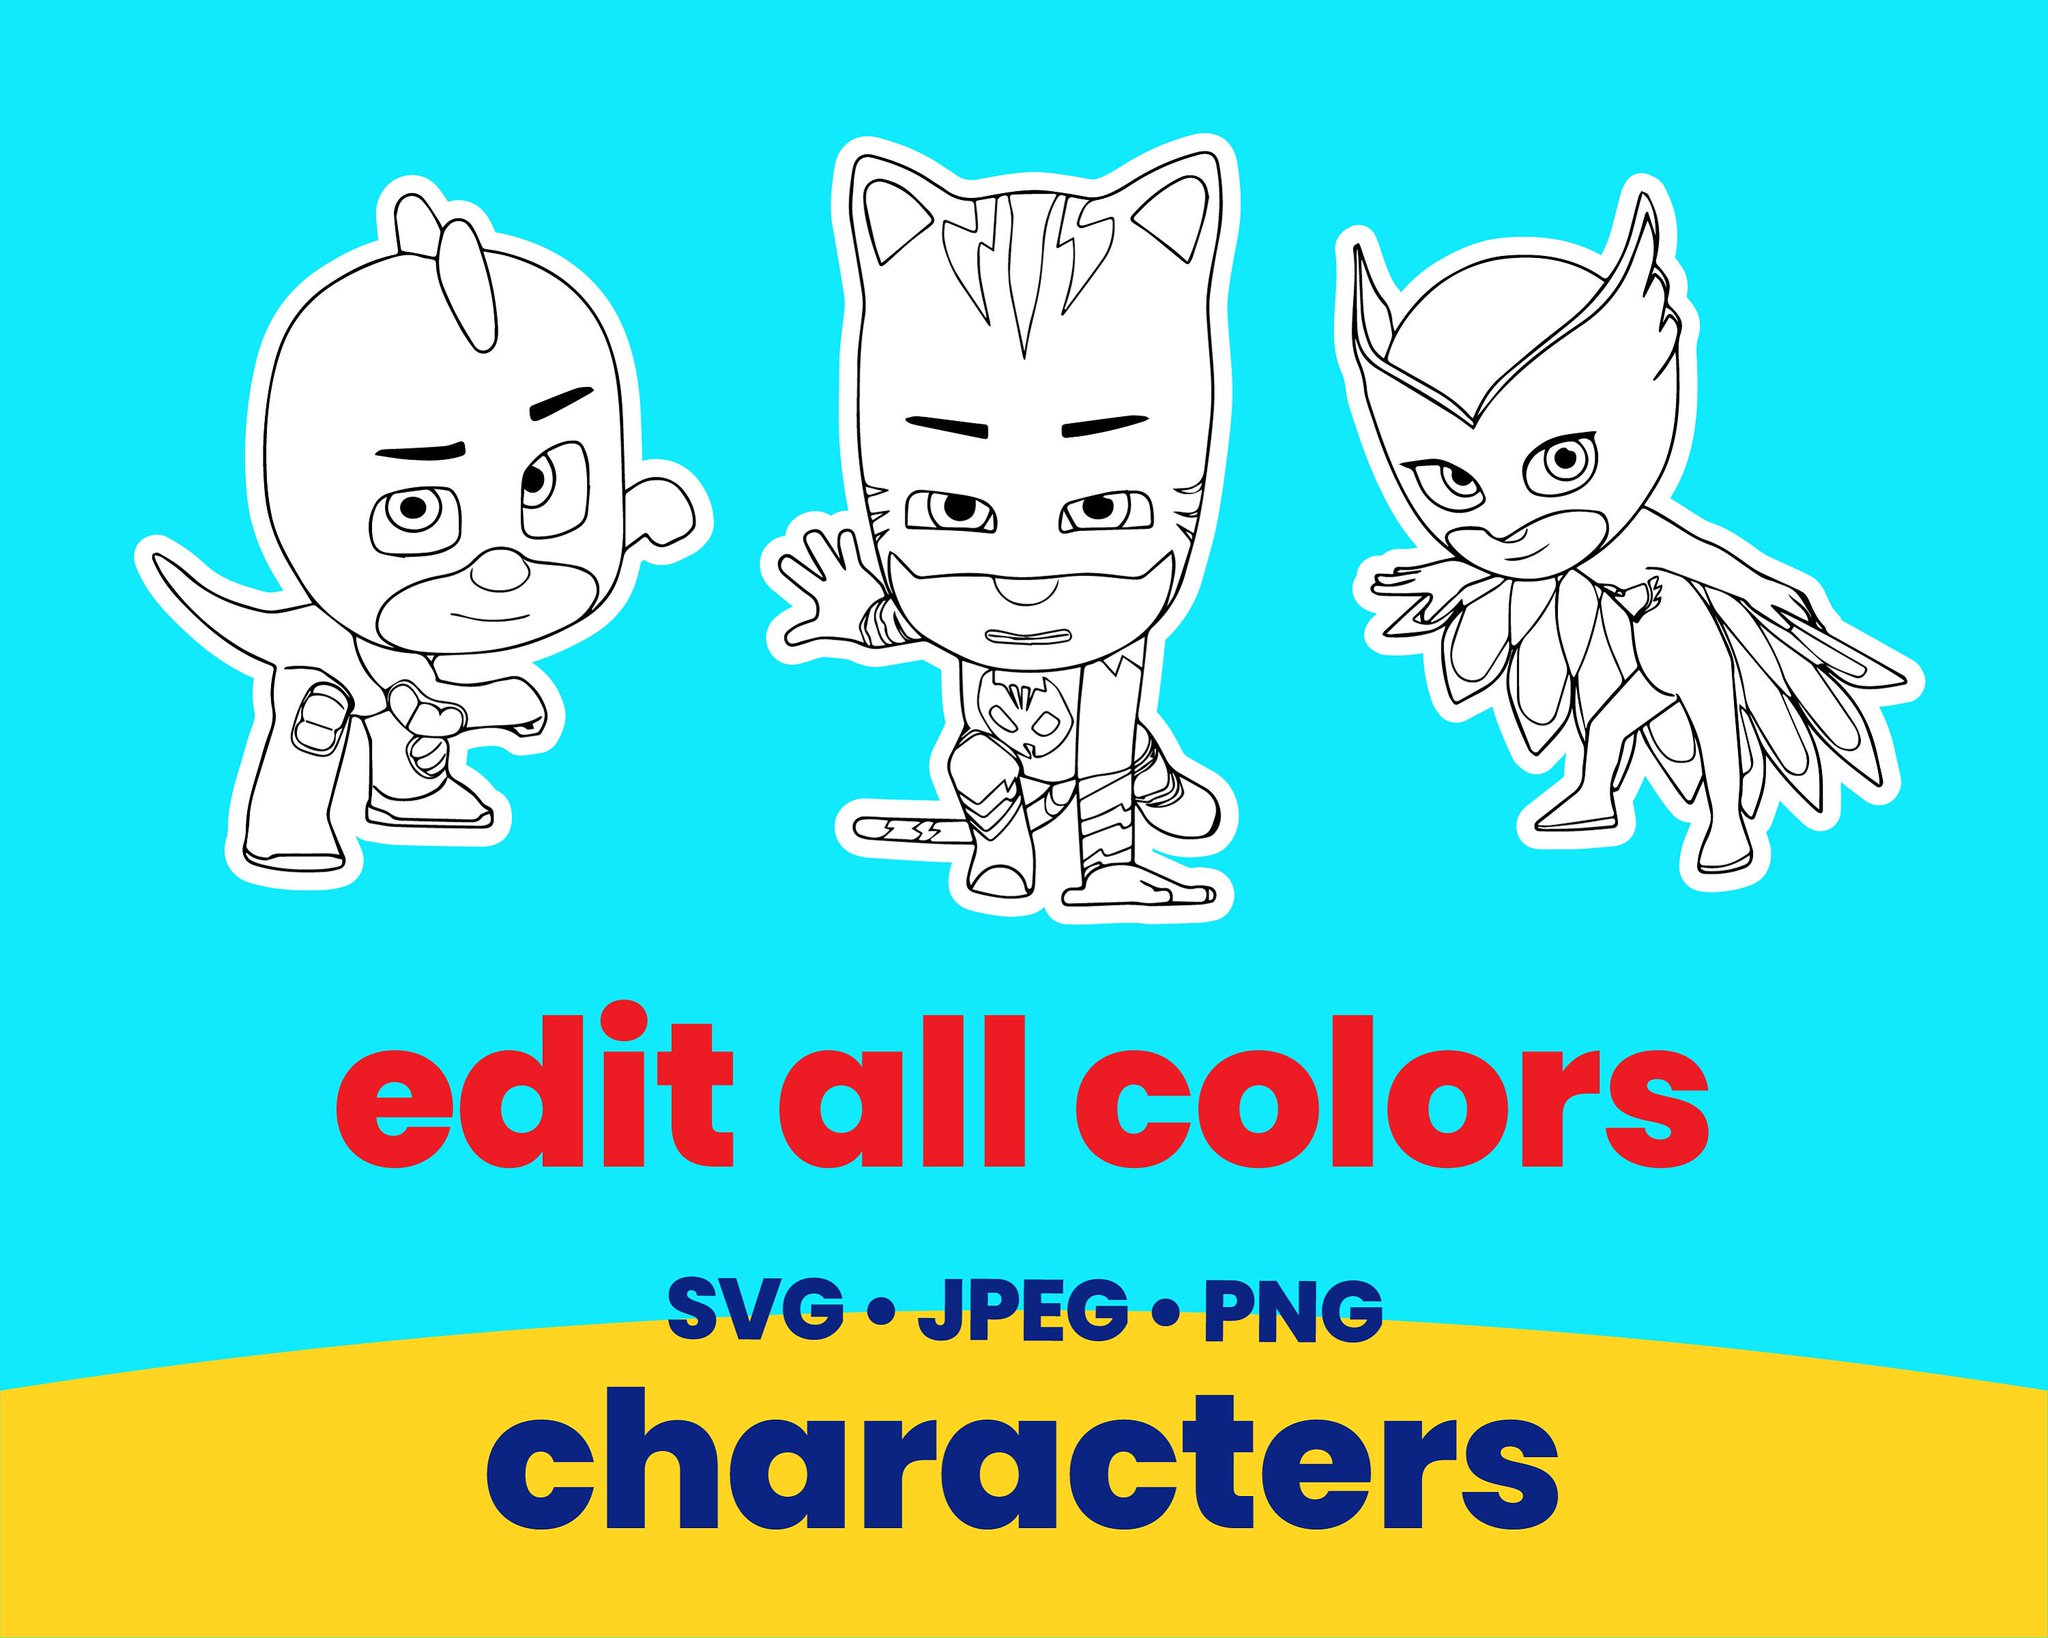 Download Partytimediy On Twitter Excited To Share The Latest Addition To My Etsy Shop Pj Masks Characters Pj Masks Svg Pj Masks Party Pj Masks Birthday Pj Masks Supplies Party Supplies Pj Masks Ideas Editable Party File Https T Co 5lowcg39b5 Https T Co